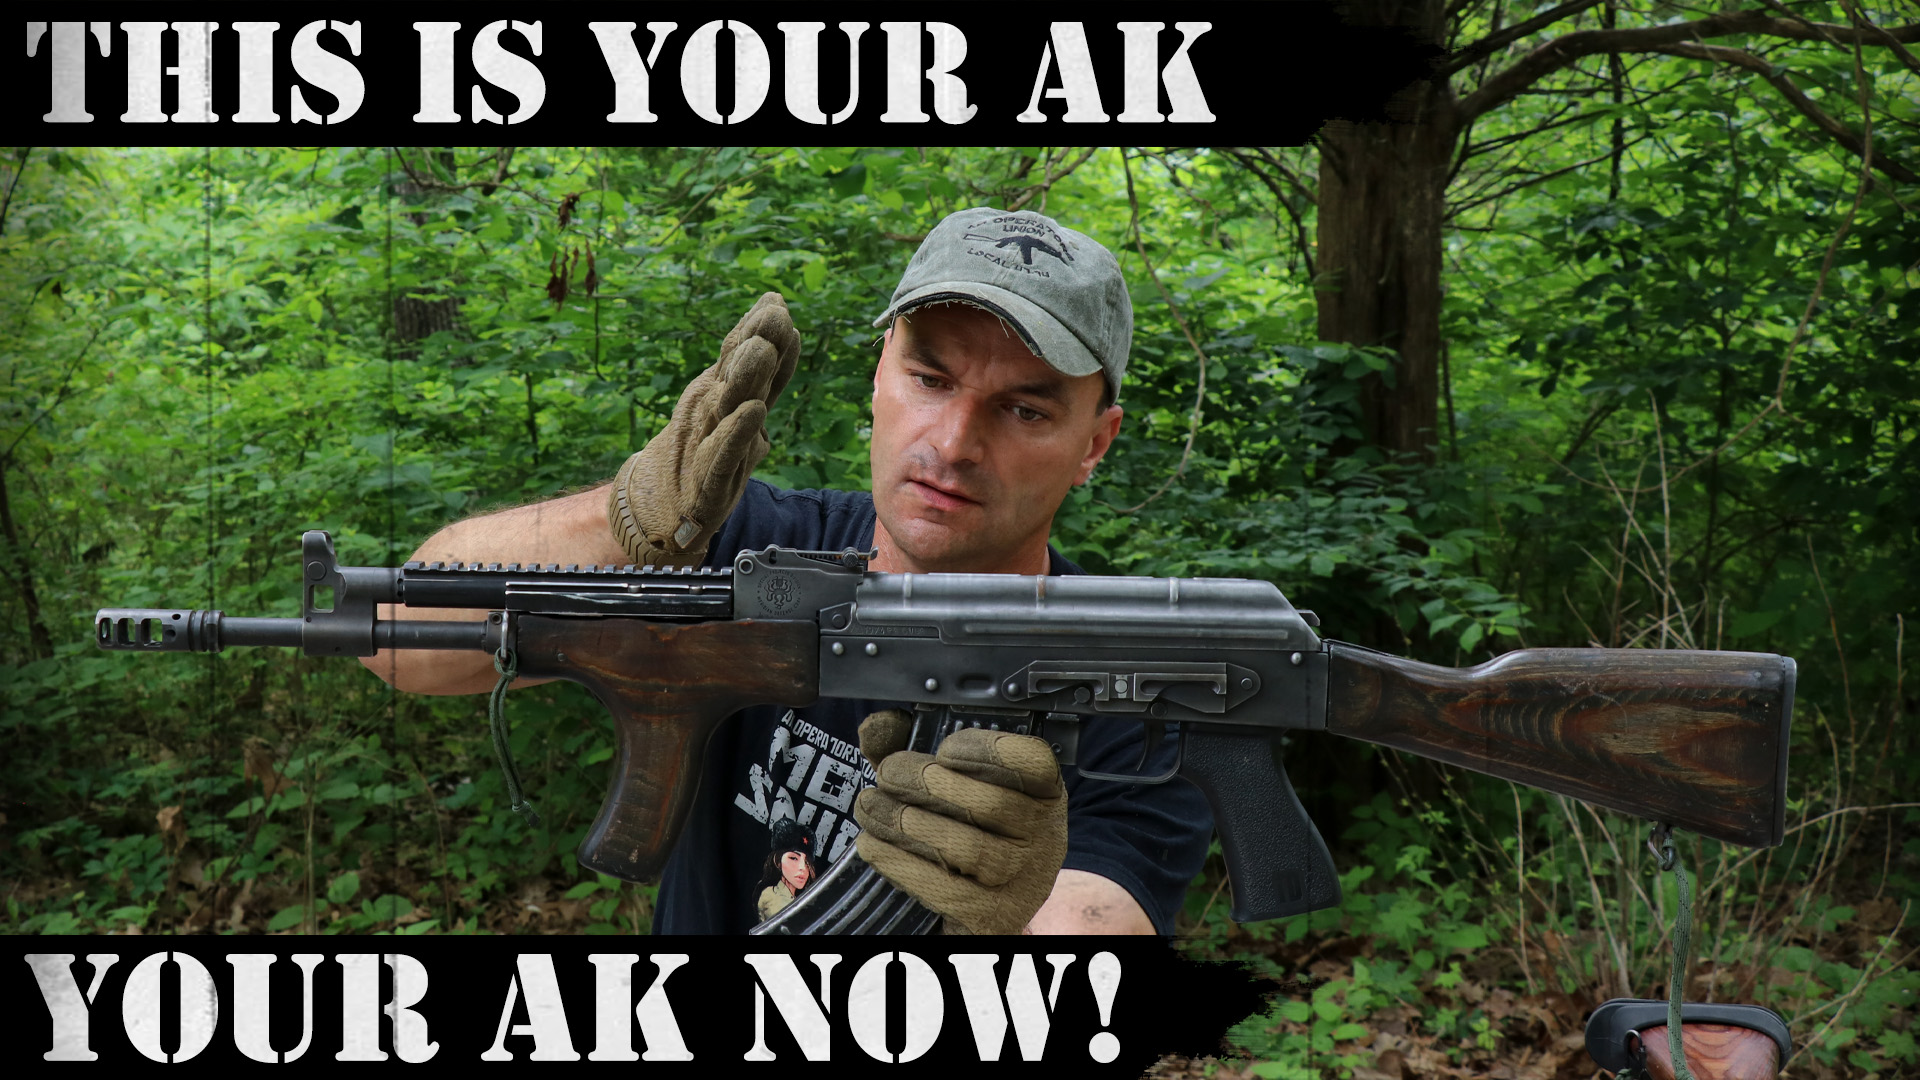 LOOK AT ME, LOOK AT ME – This is YOUR AK NOW!